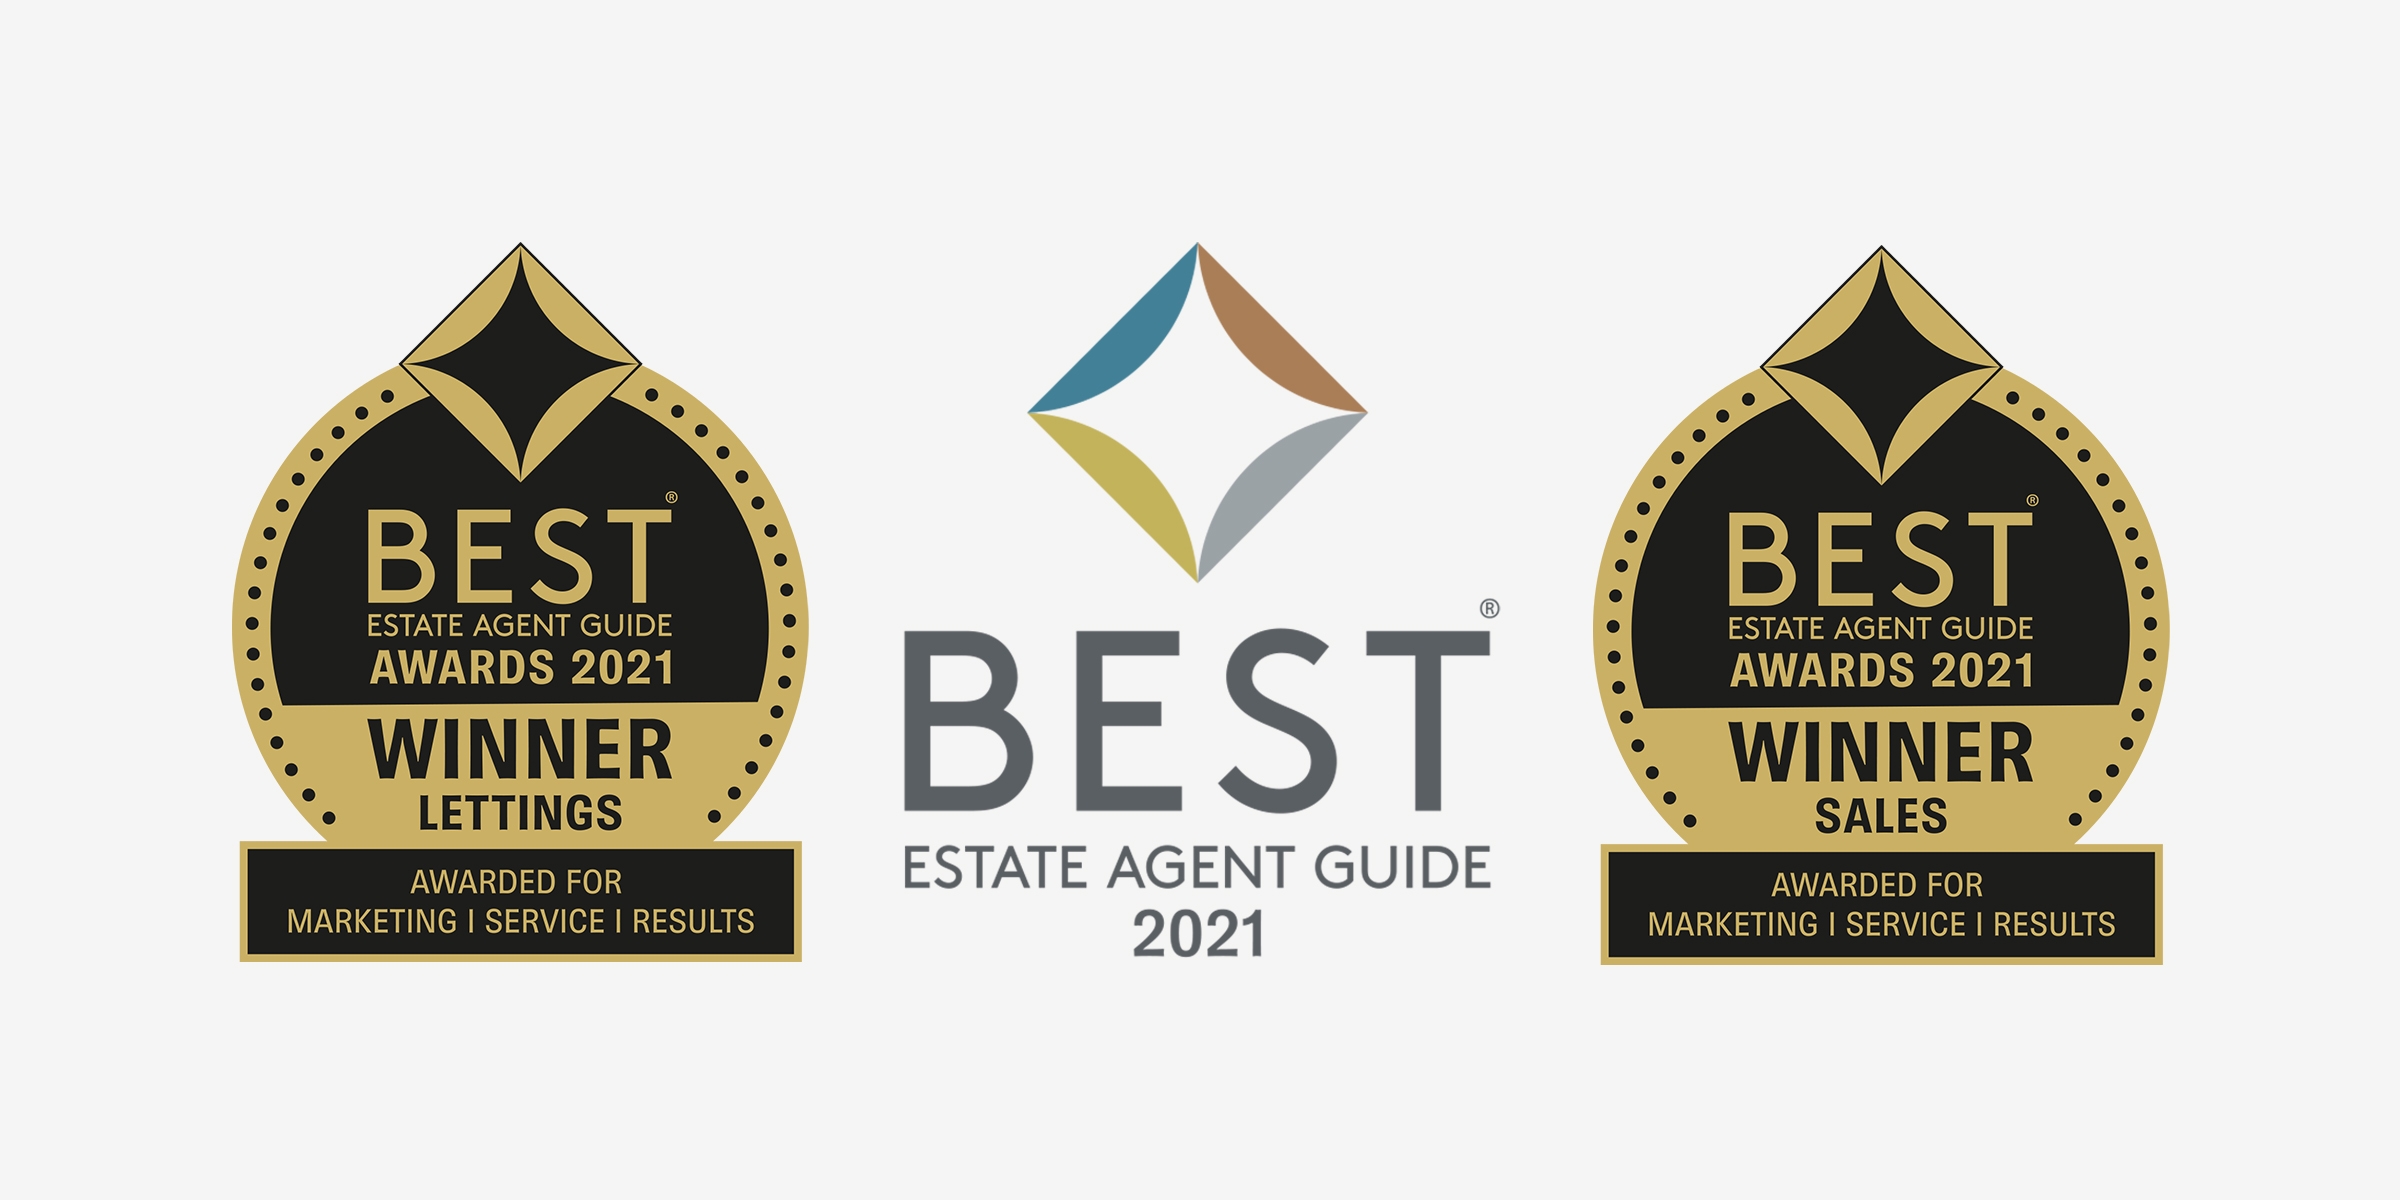 It’s official – Parkers is one of the very best Estate Agents in the country!